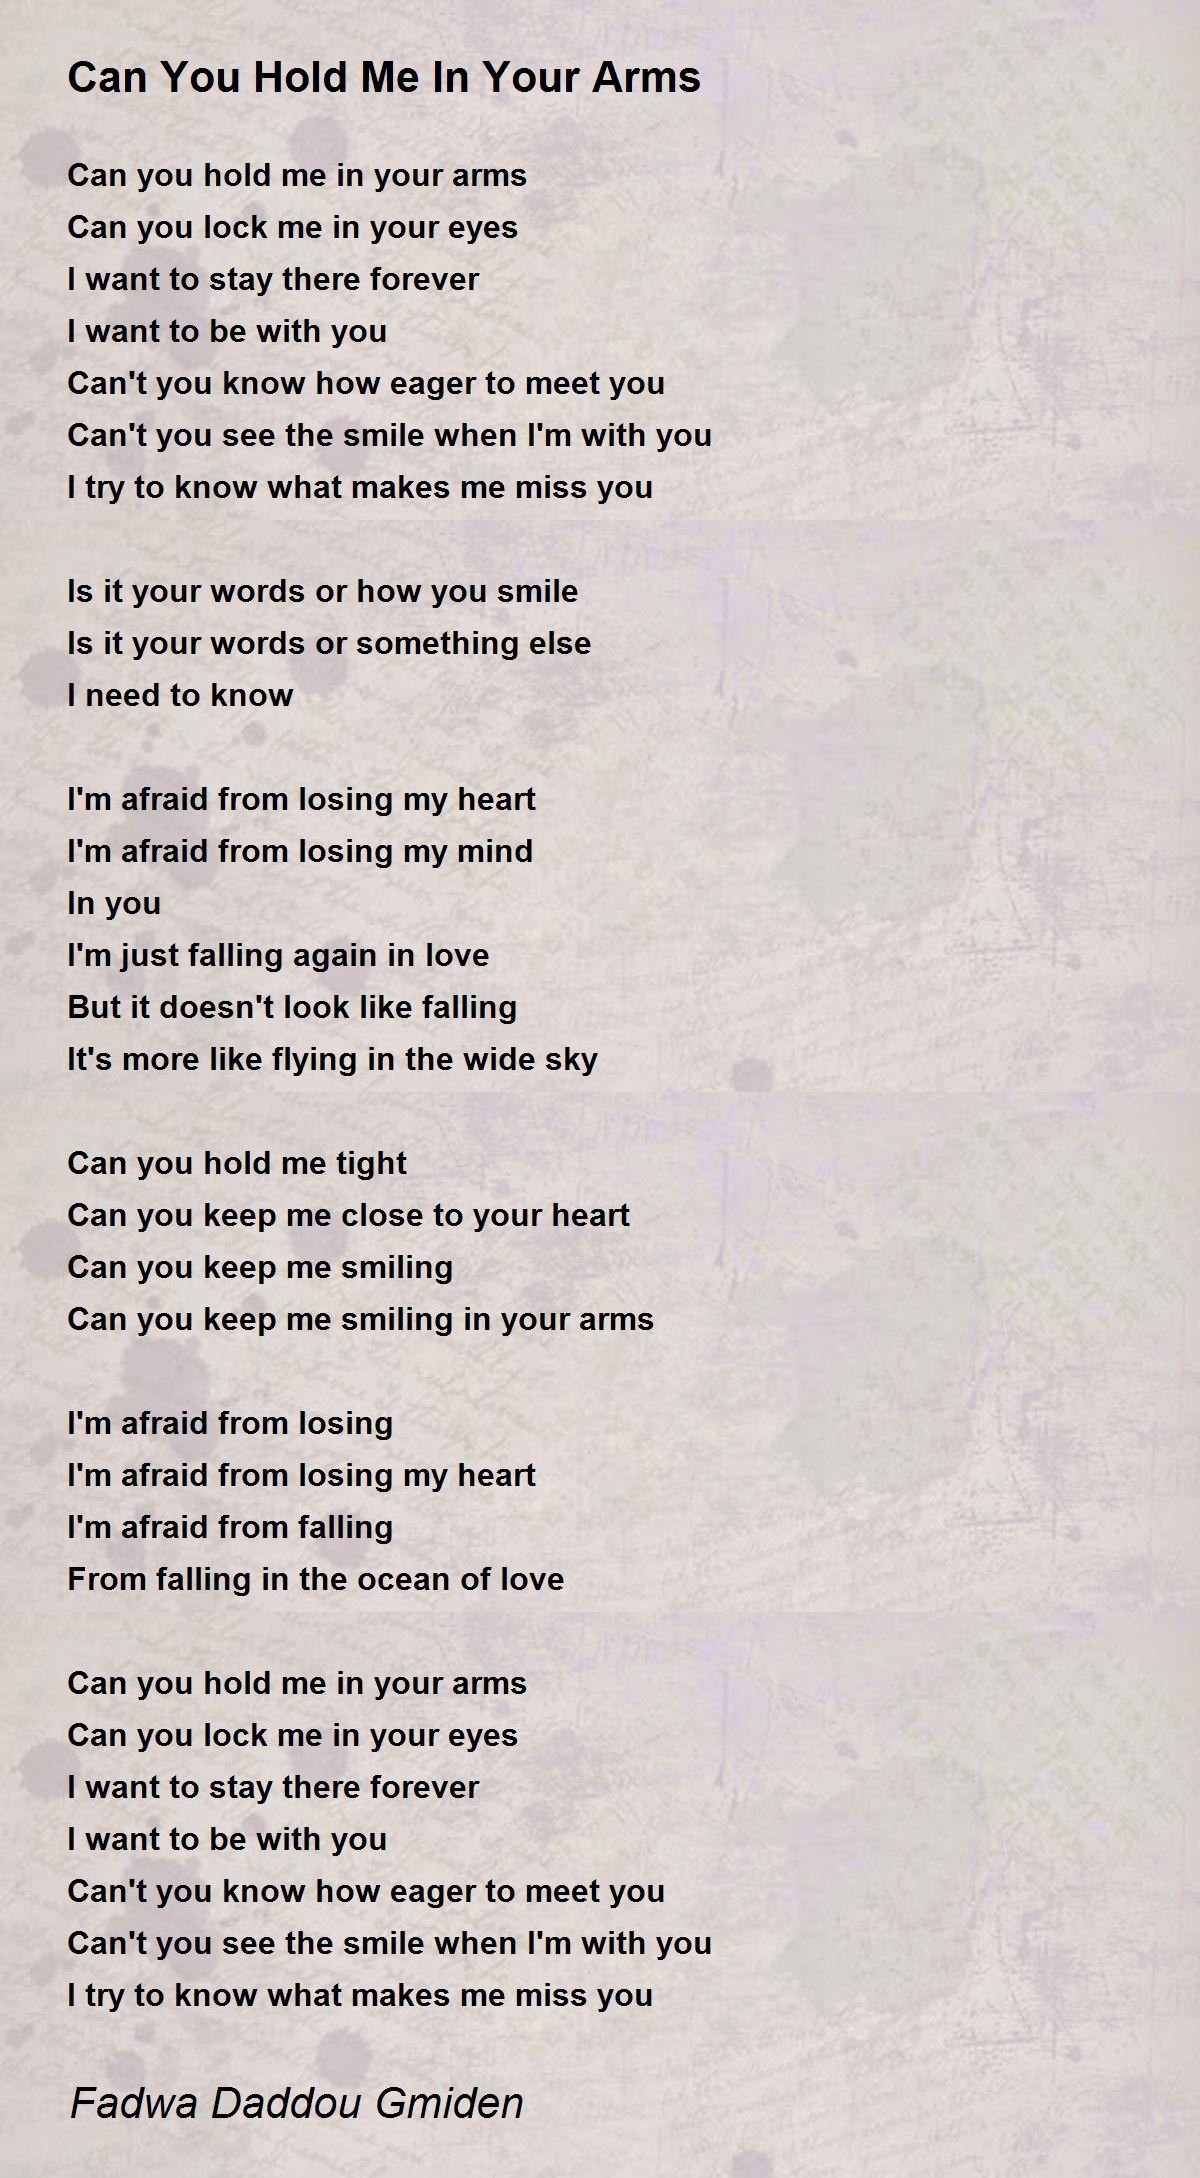 Can You Hold Me In Your Arms - Can You Hold Me In Your Arms Poem